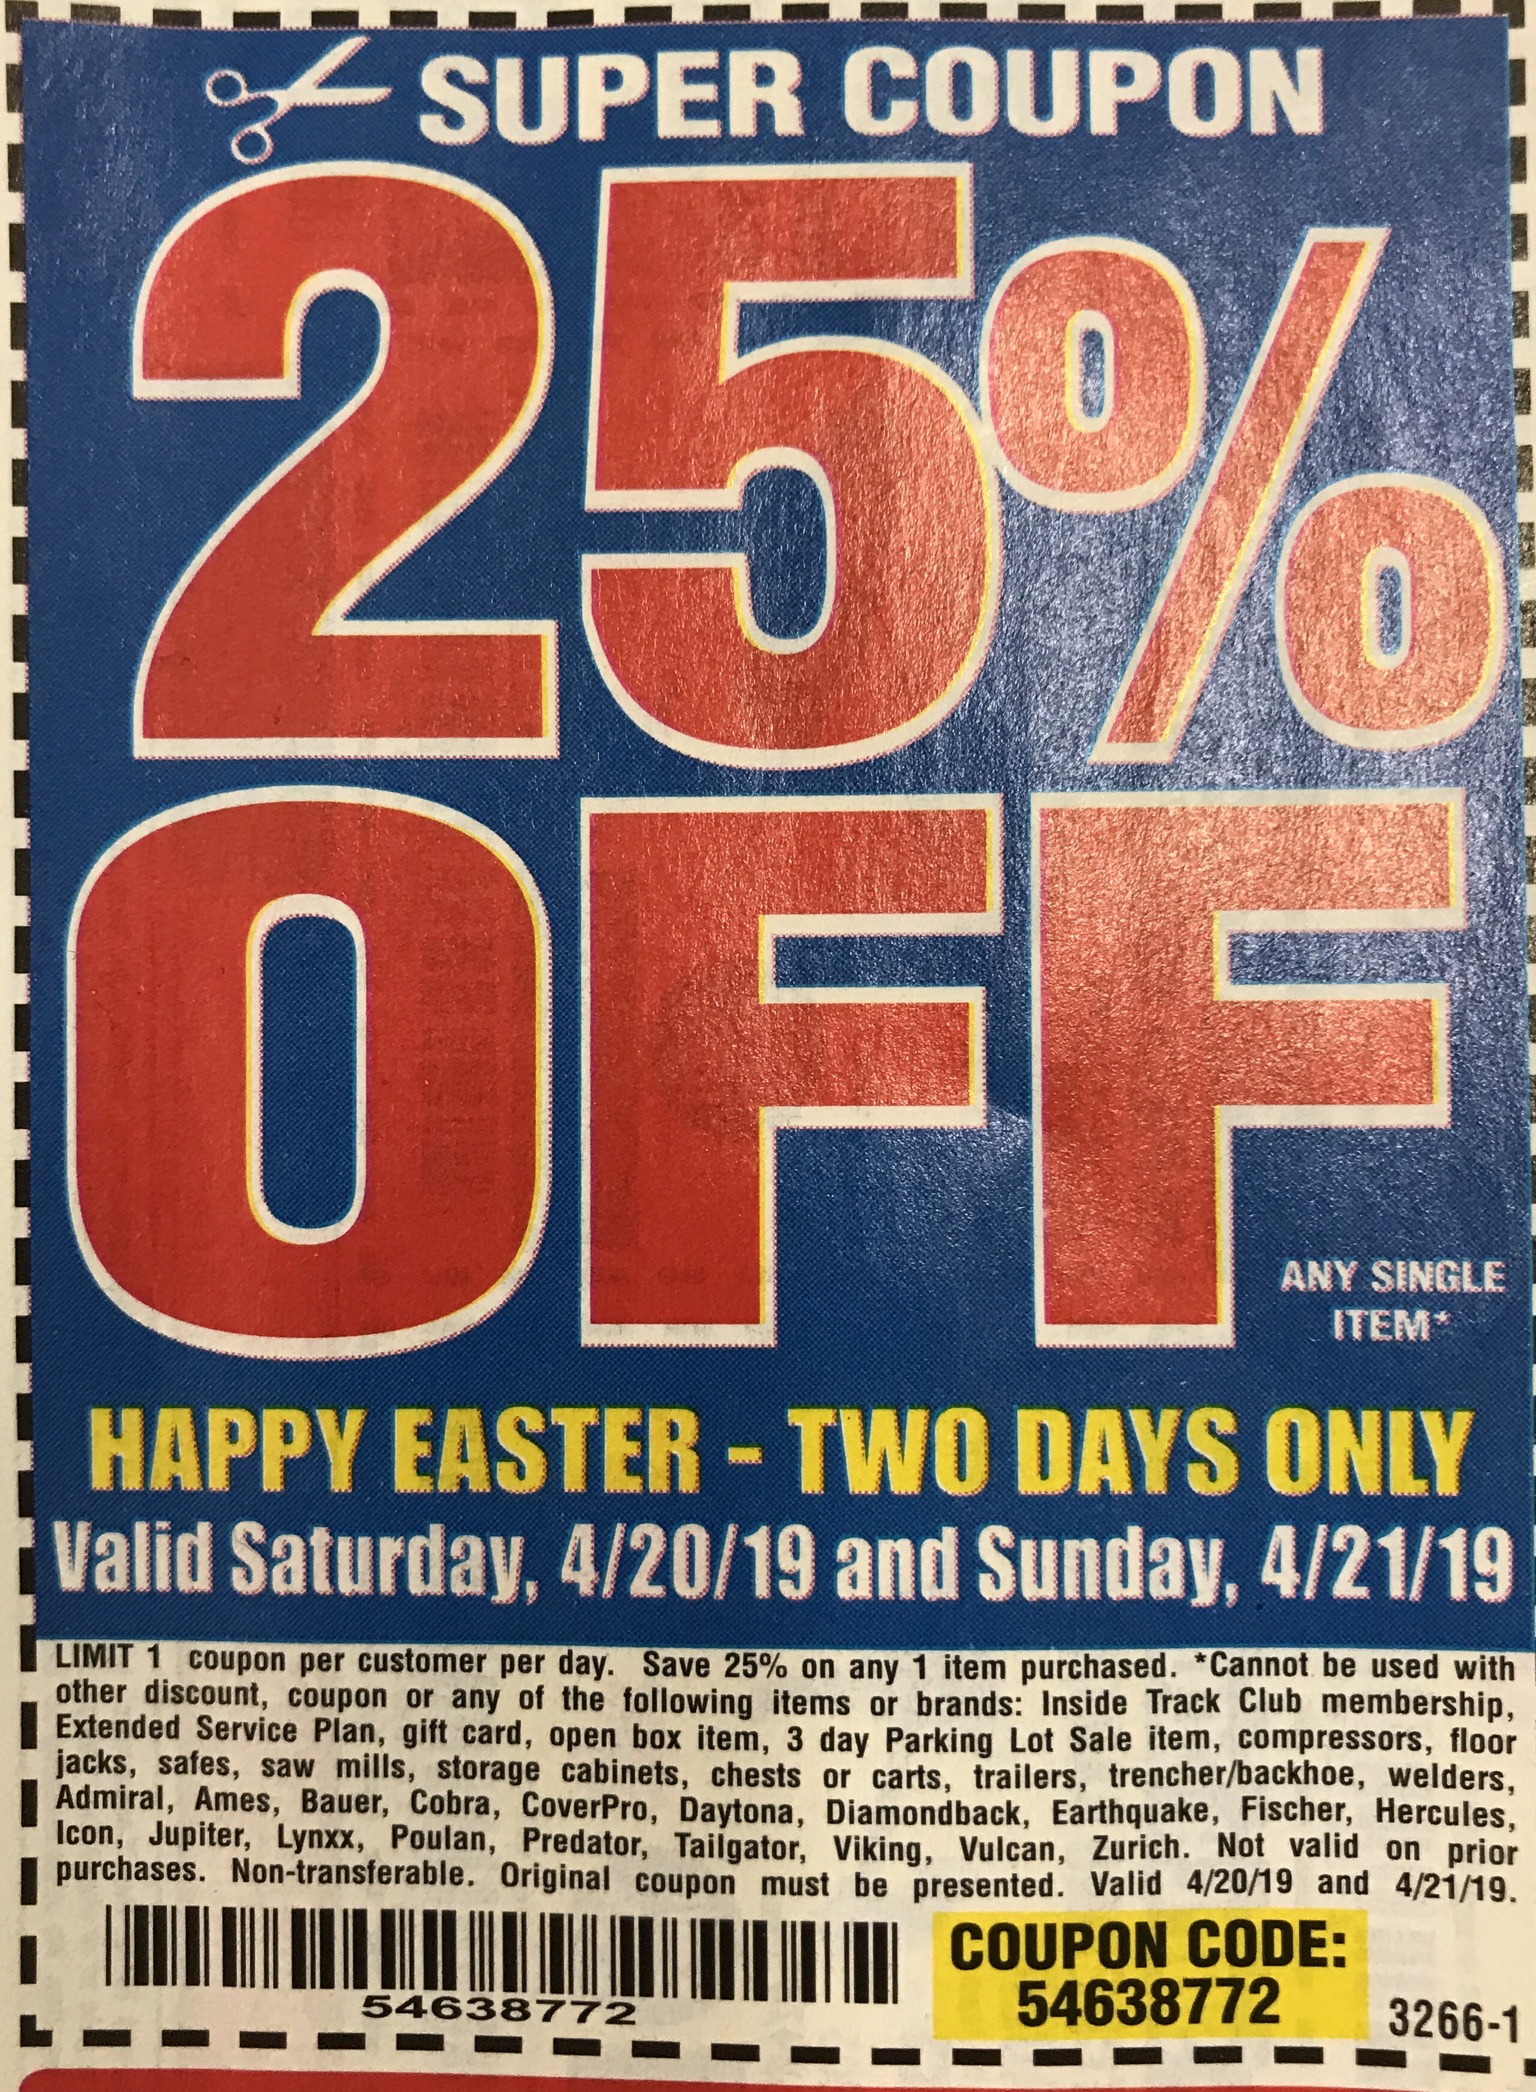 Harbor Freight Coupon 25 Off Single Item Happy Easter Now 3